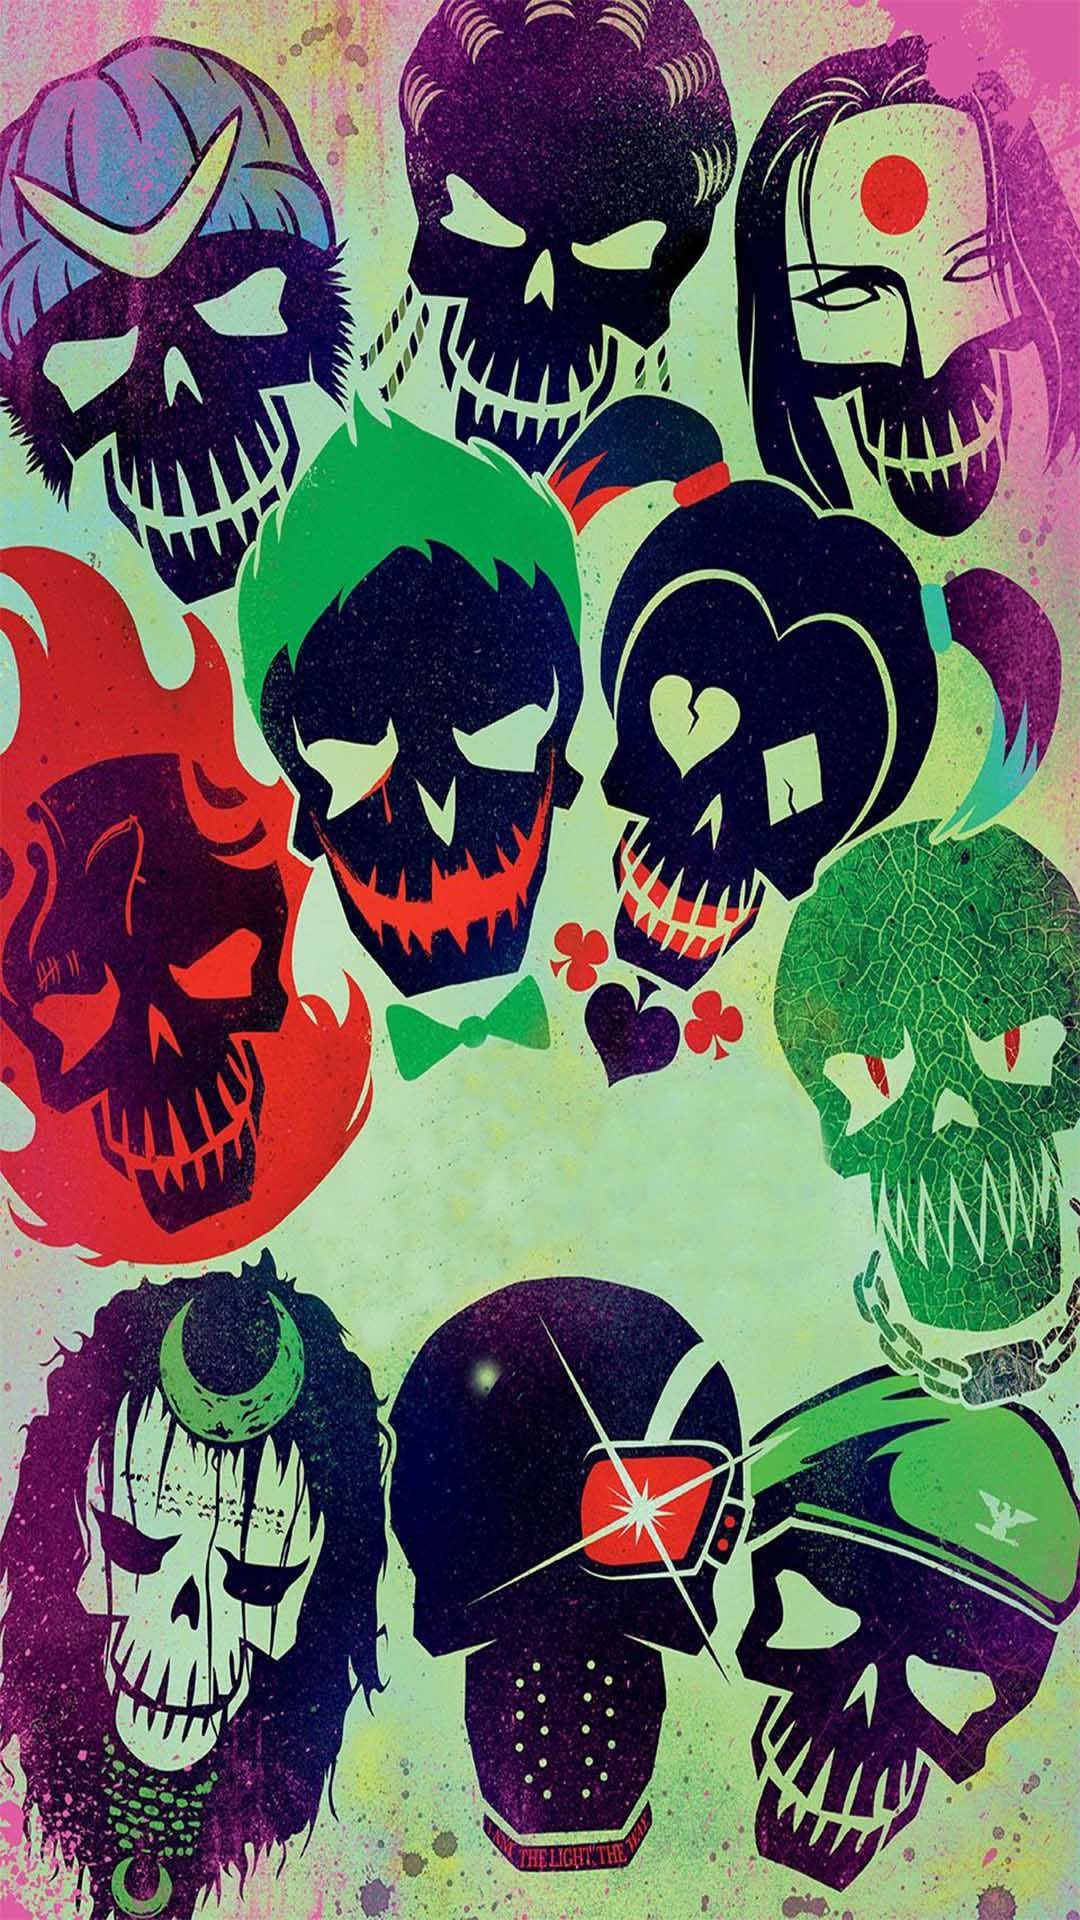 The Suicide Squad Iphone Wallpapers